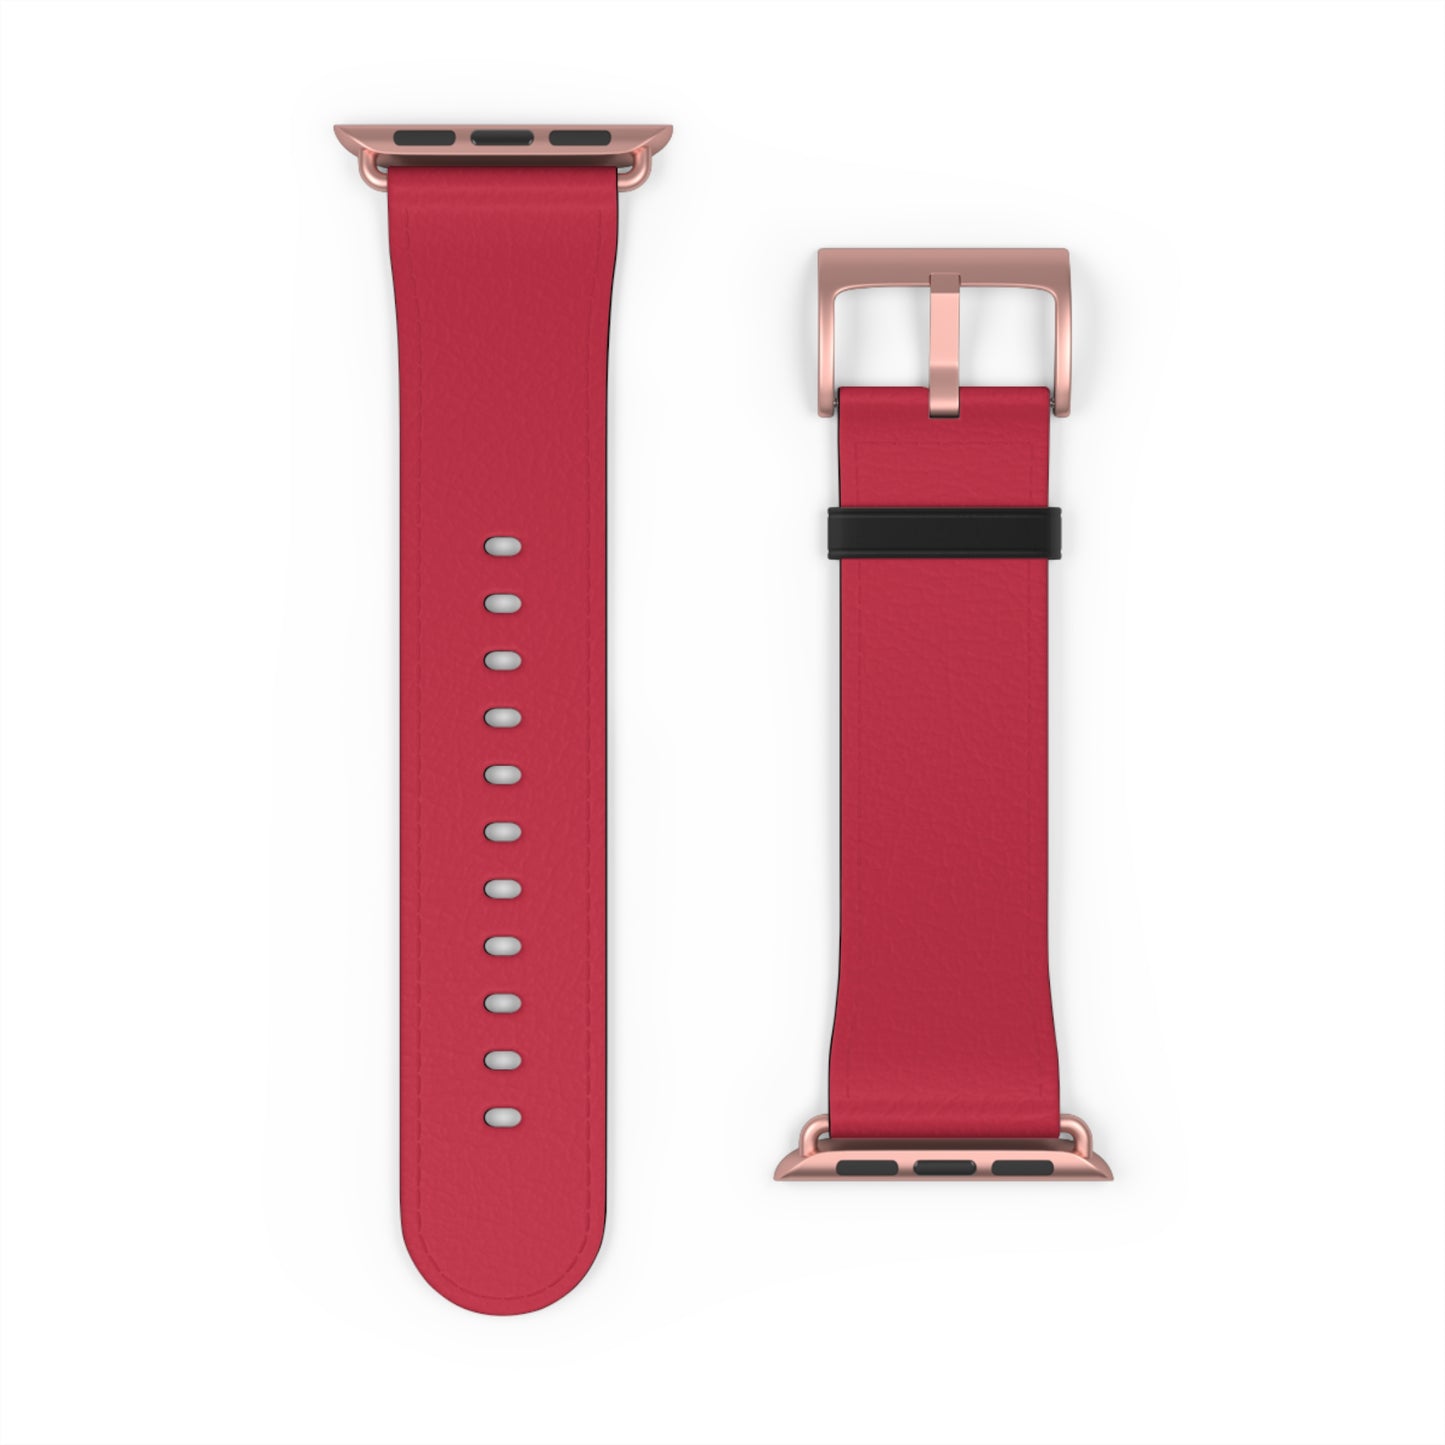 RED APPLE® WATCH BAND- PANTONE® 193